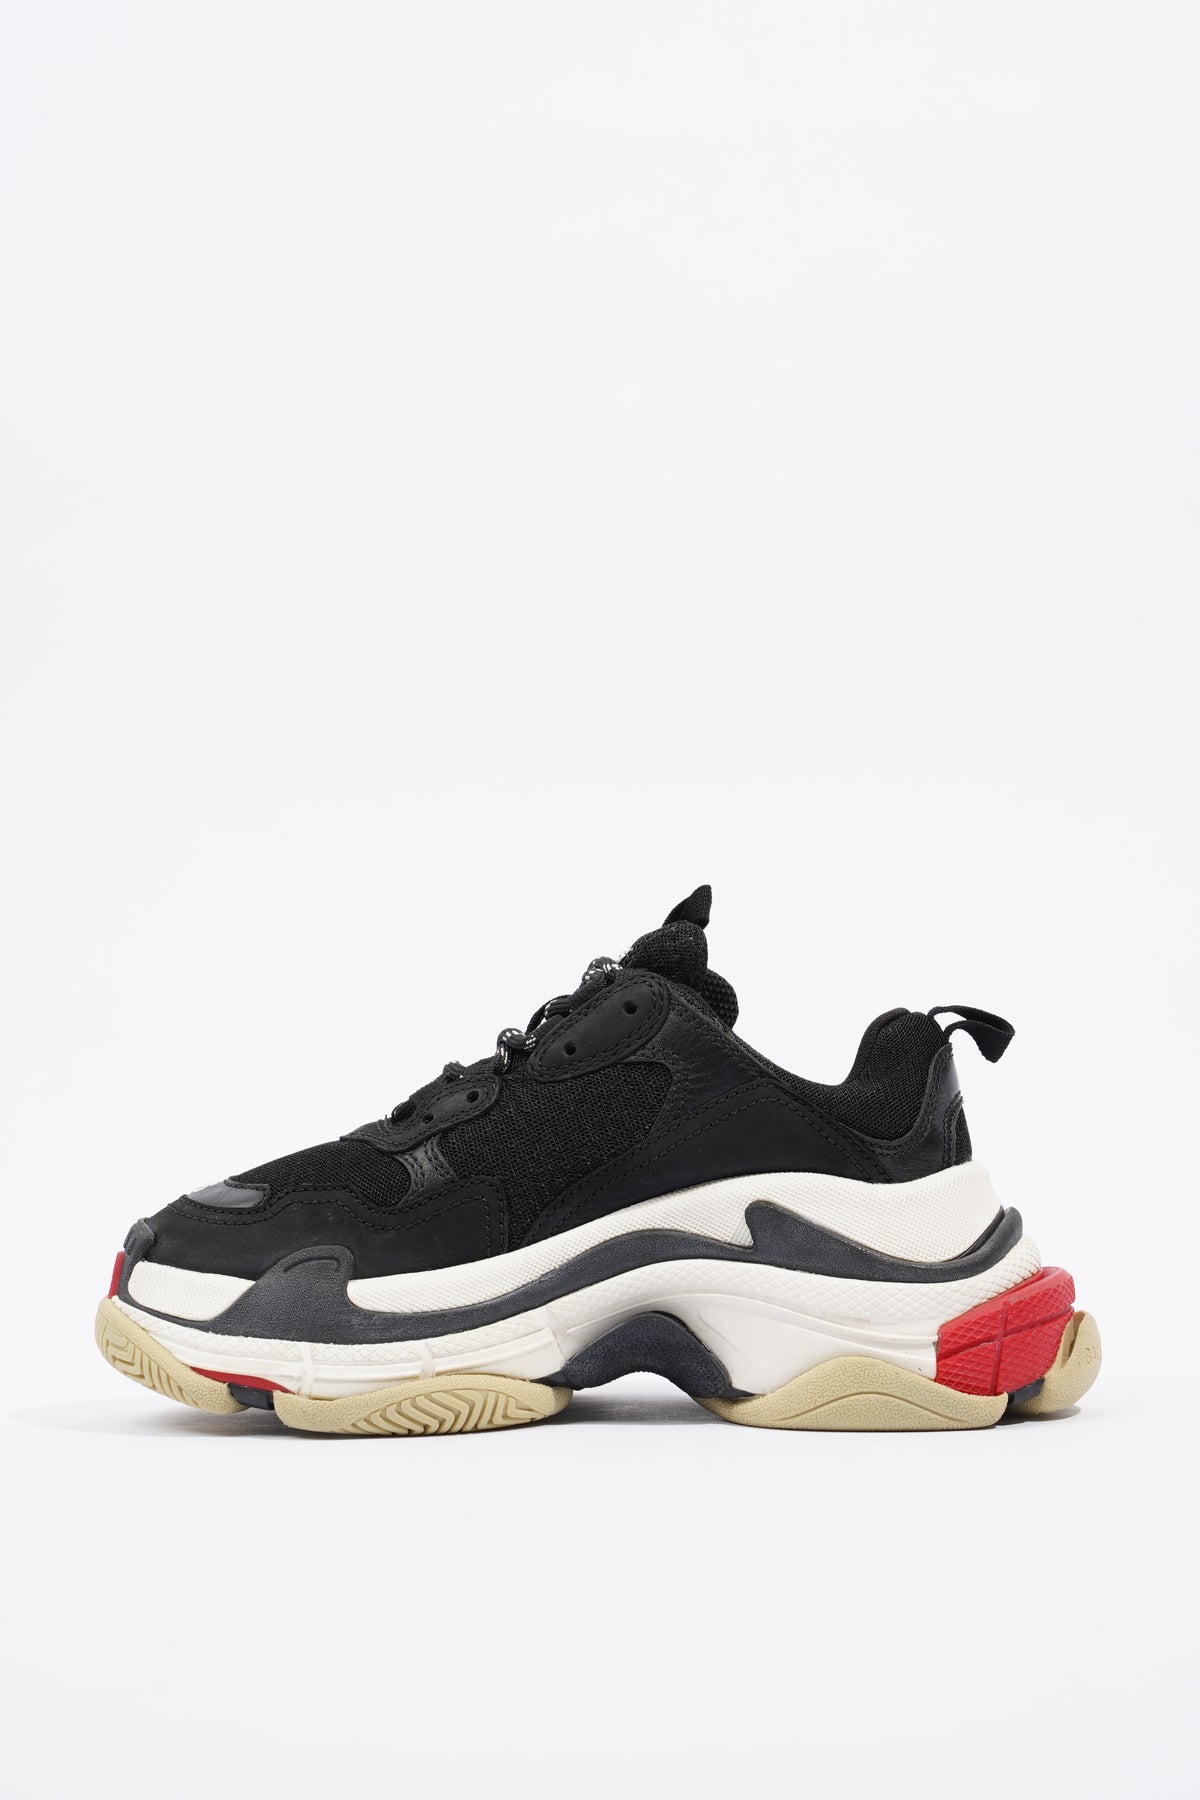 Balenciaga Triple S Women's Black And Red Sneakers New